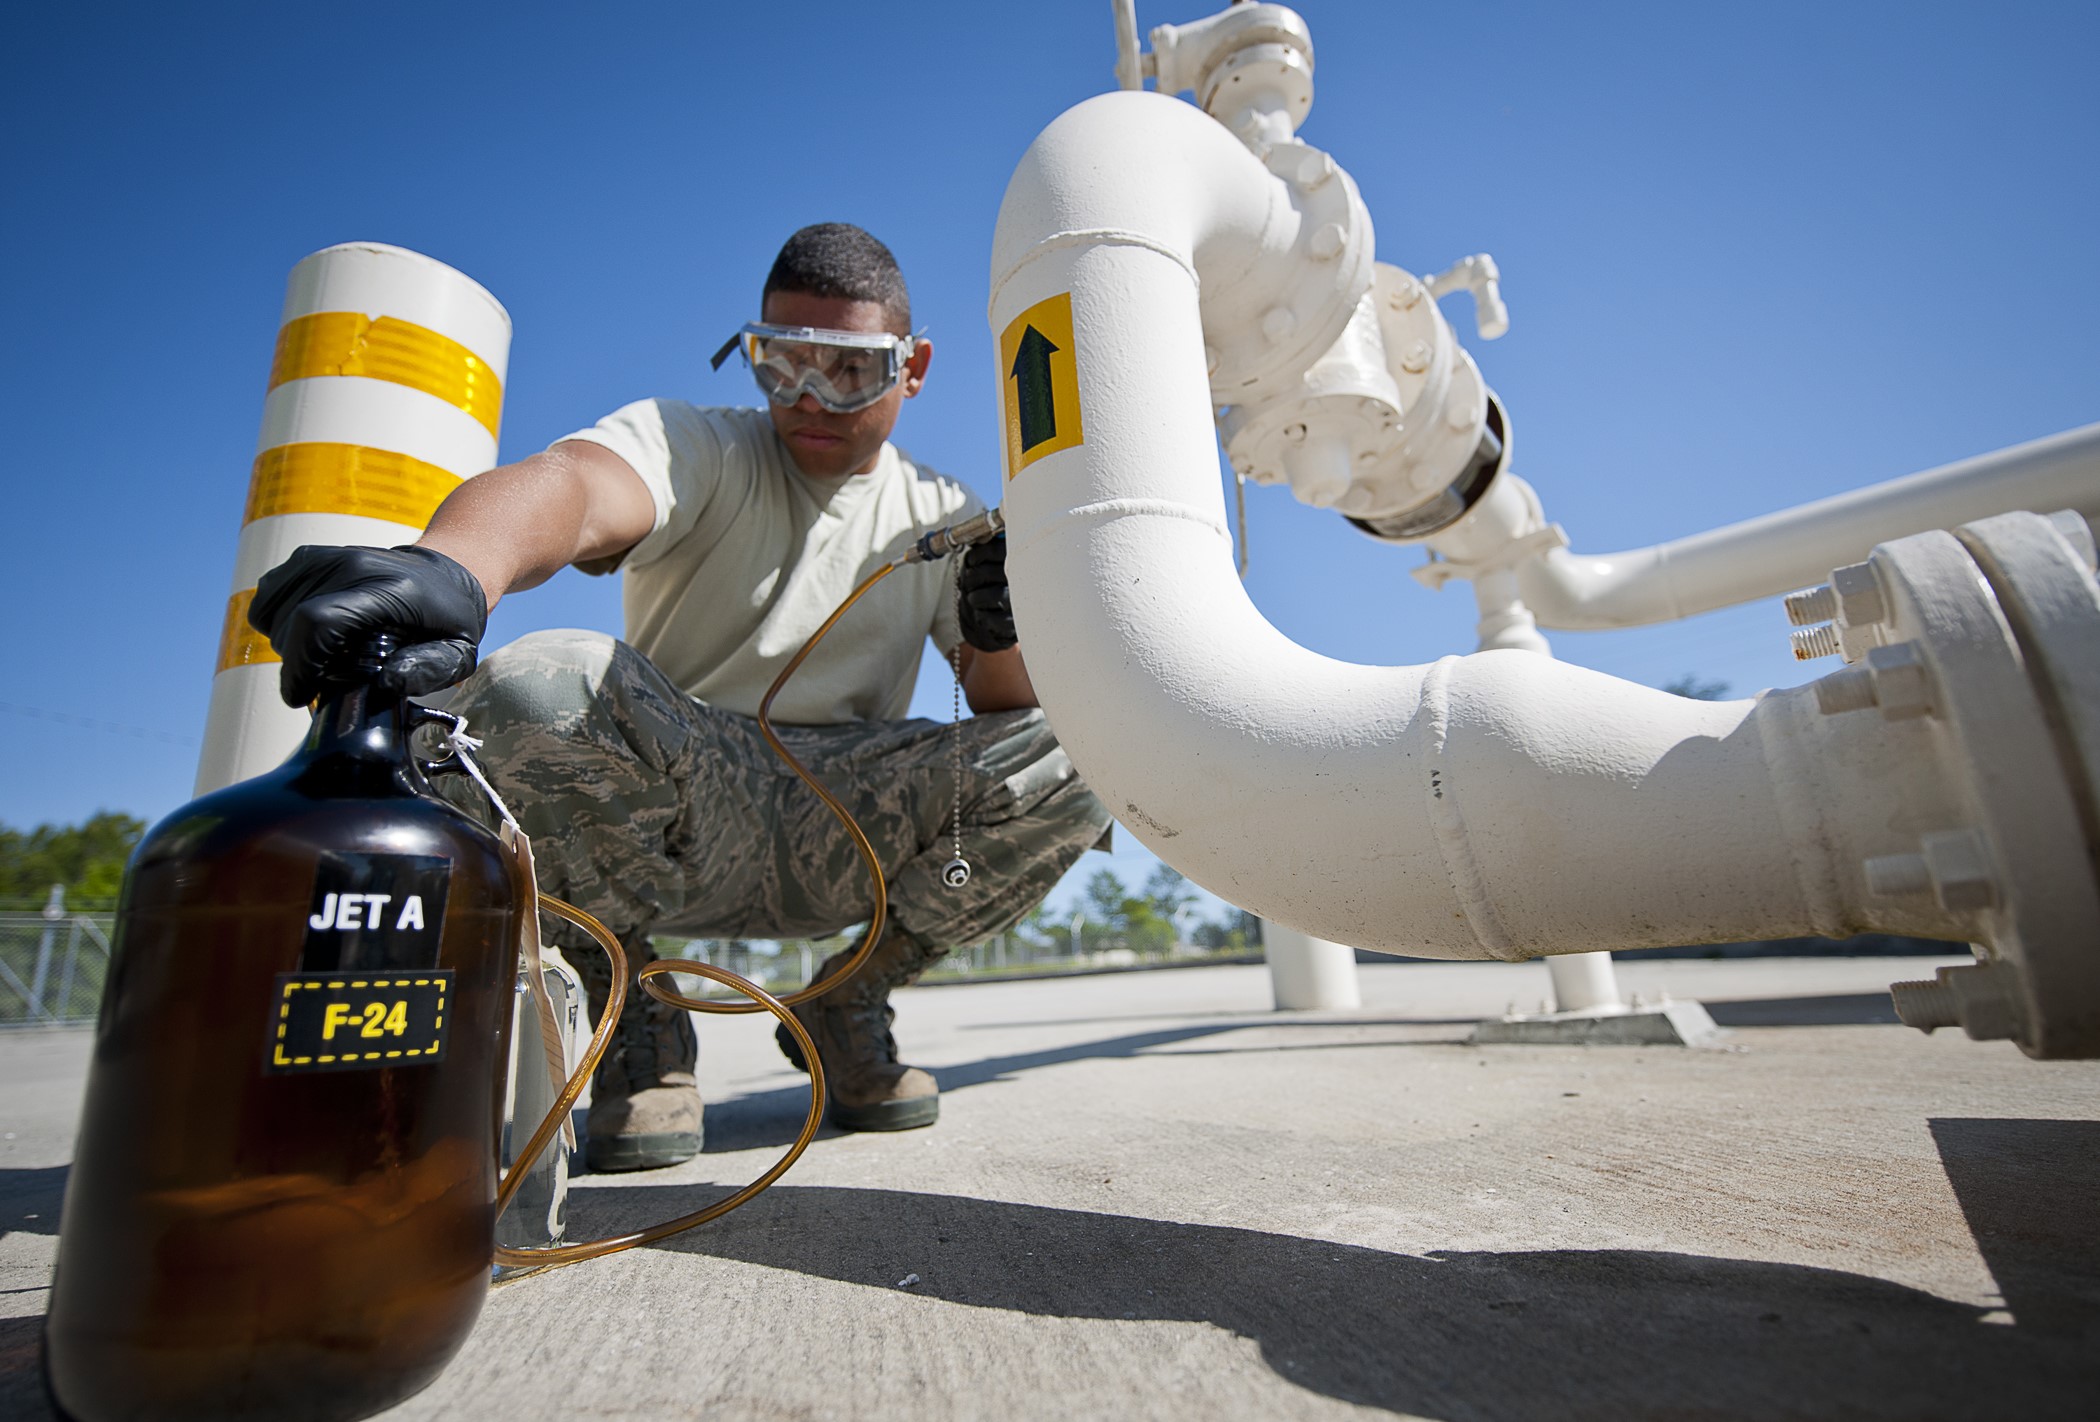 Senior Airman takes a sample of Jet-A fuel from a pipe while the fuel is being offloaded from a truck at Eglin Air Force Base, Fla.